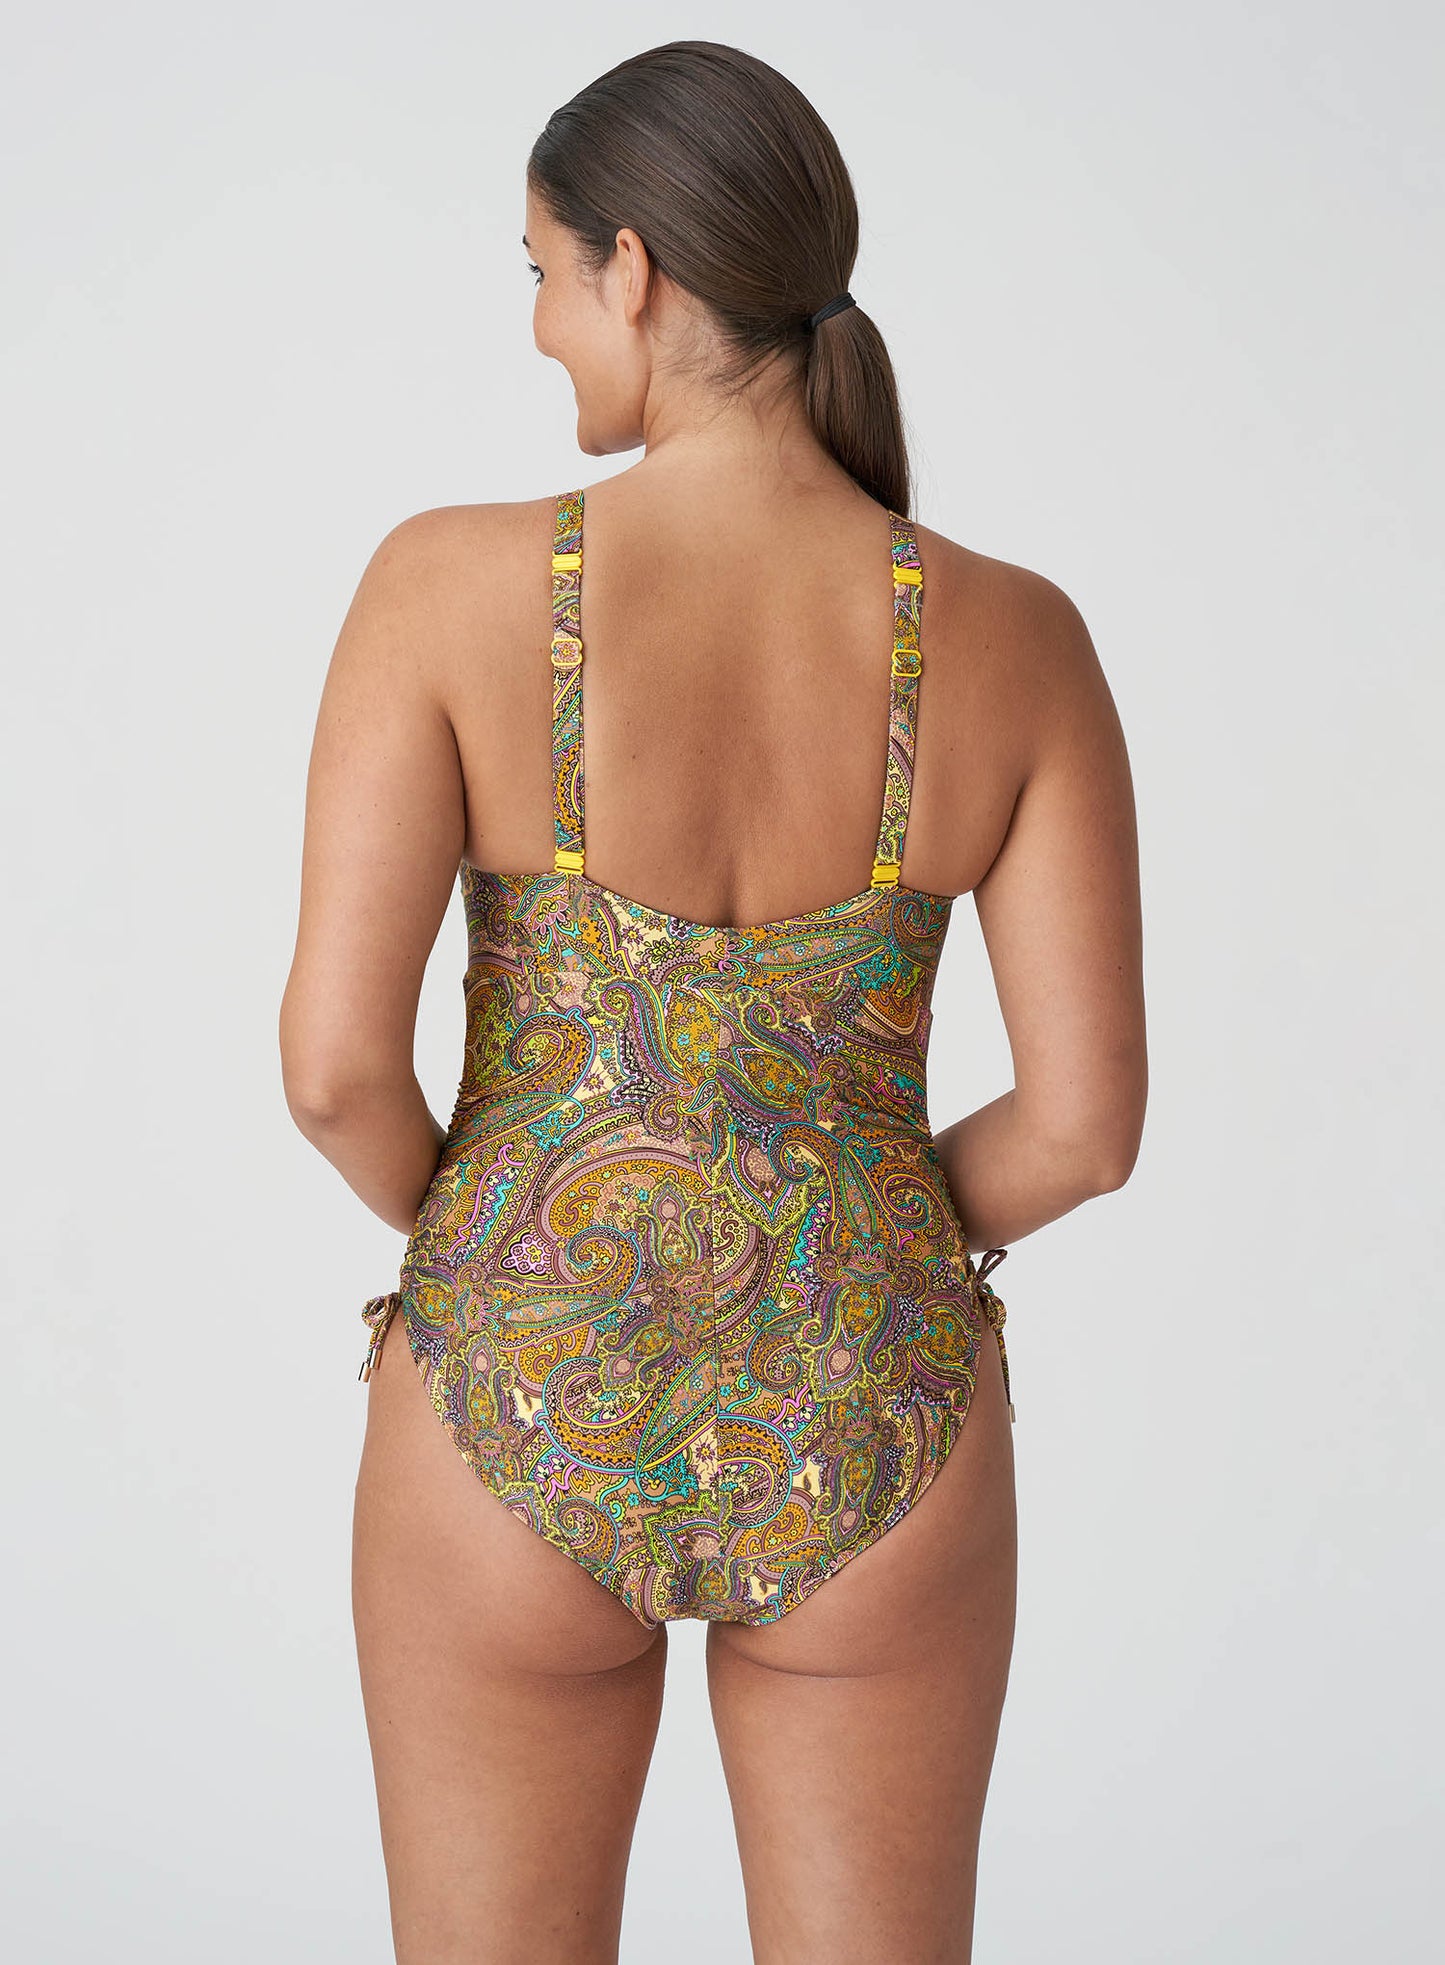 PrimaDonna Holiday One Piece Swimsuit 400-7146 - The BraBar & Panterie